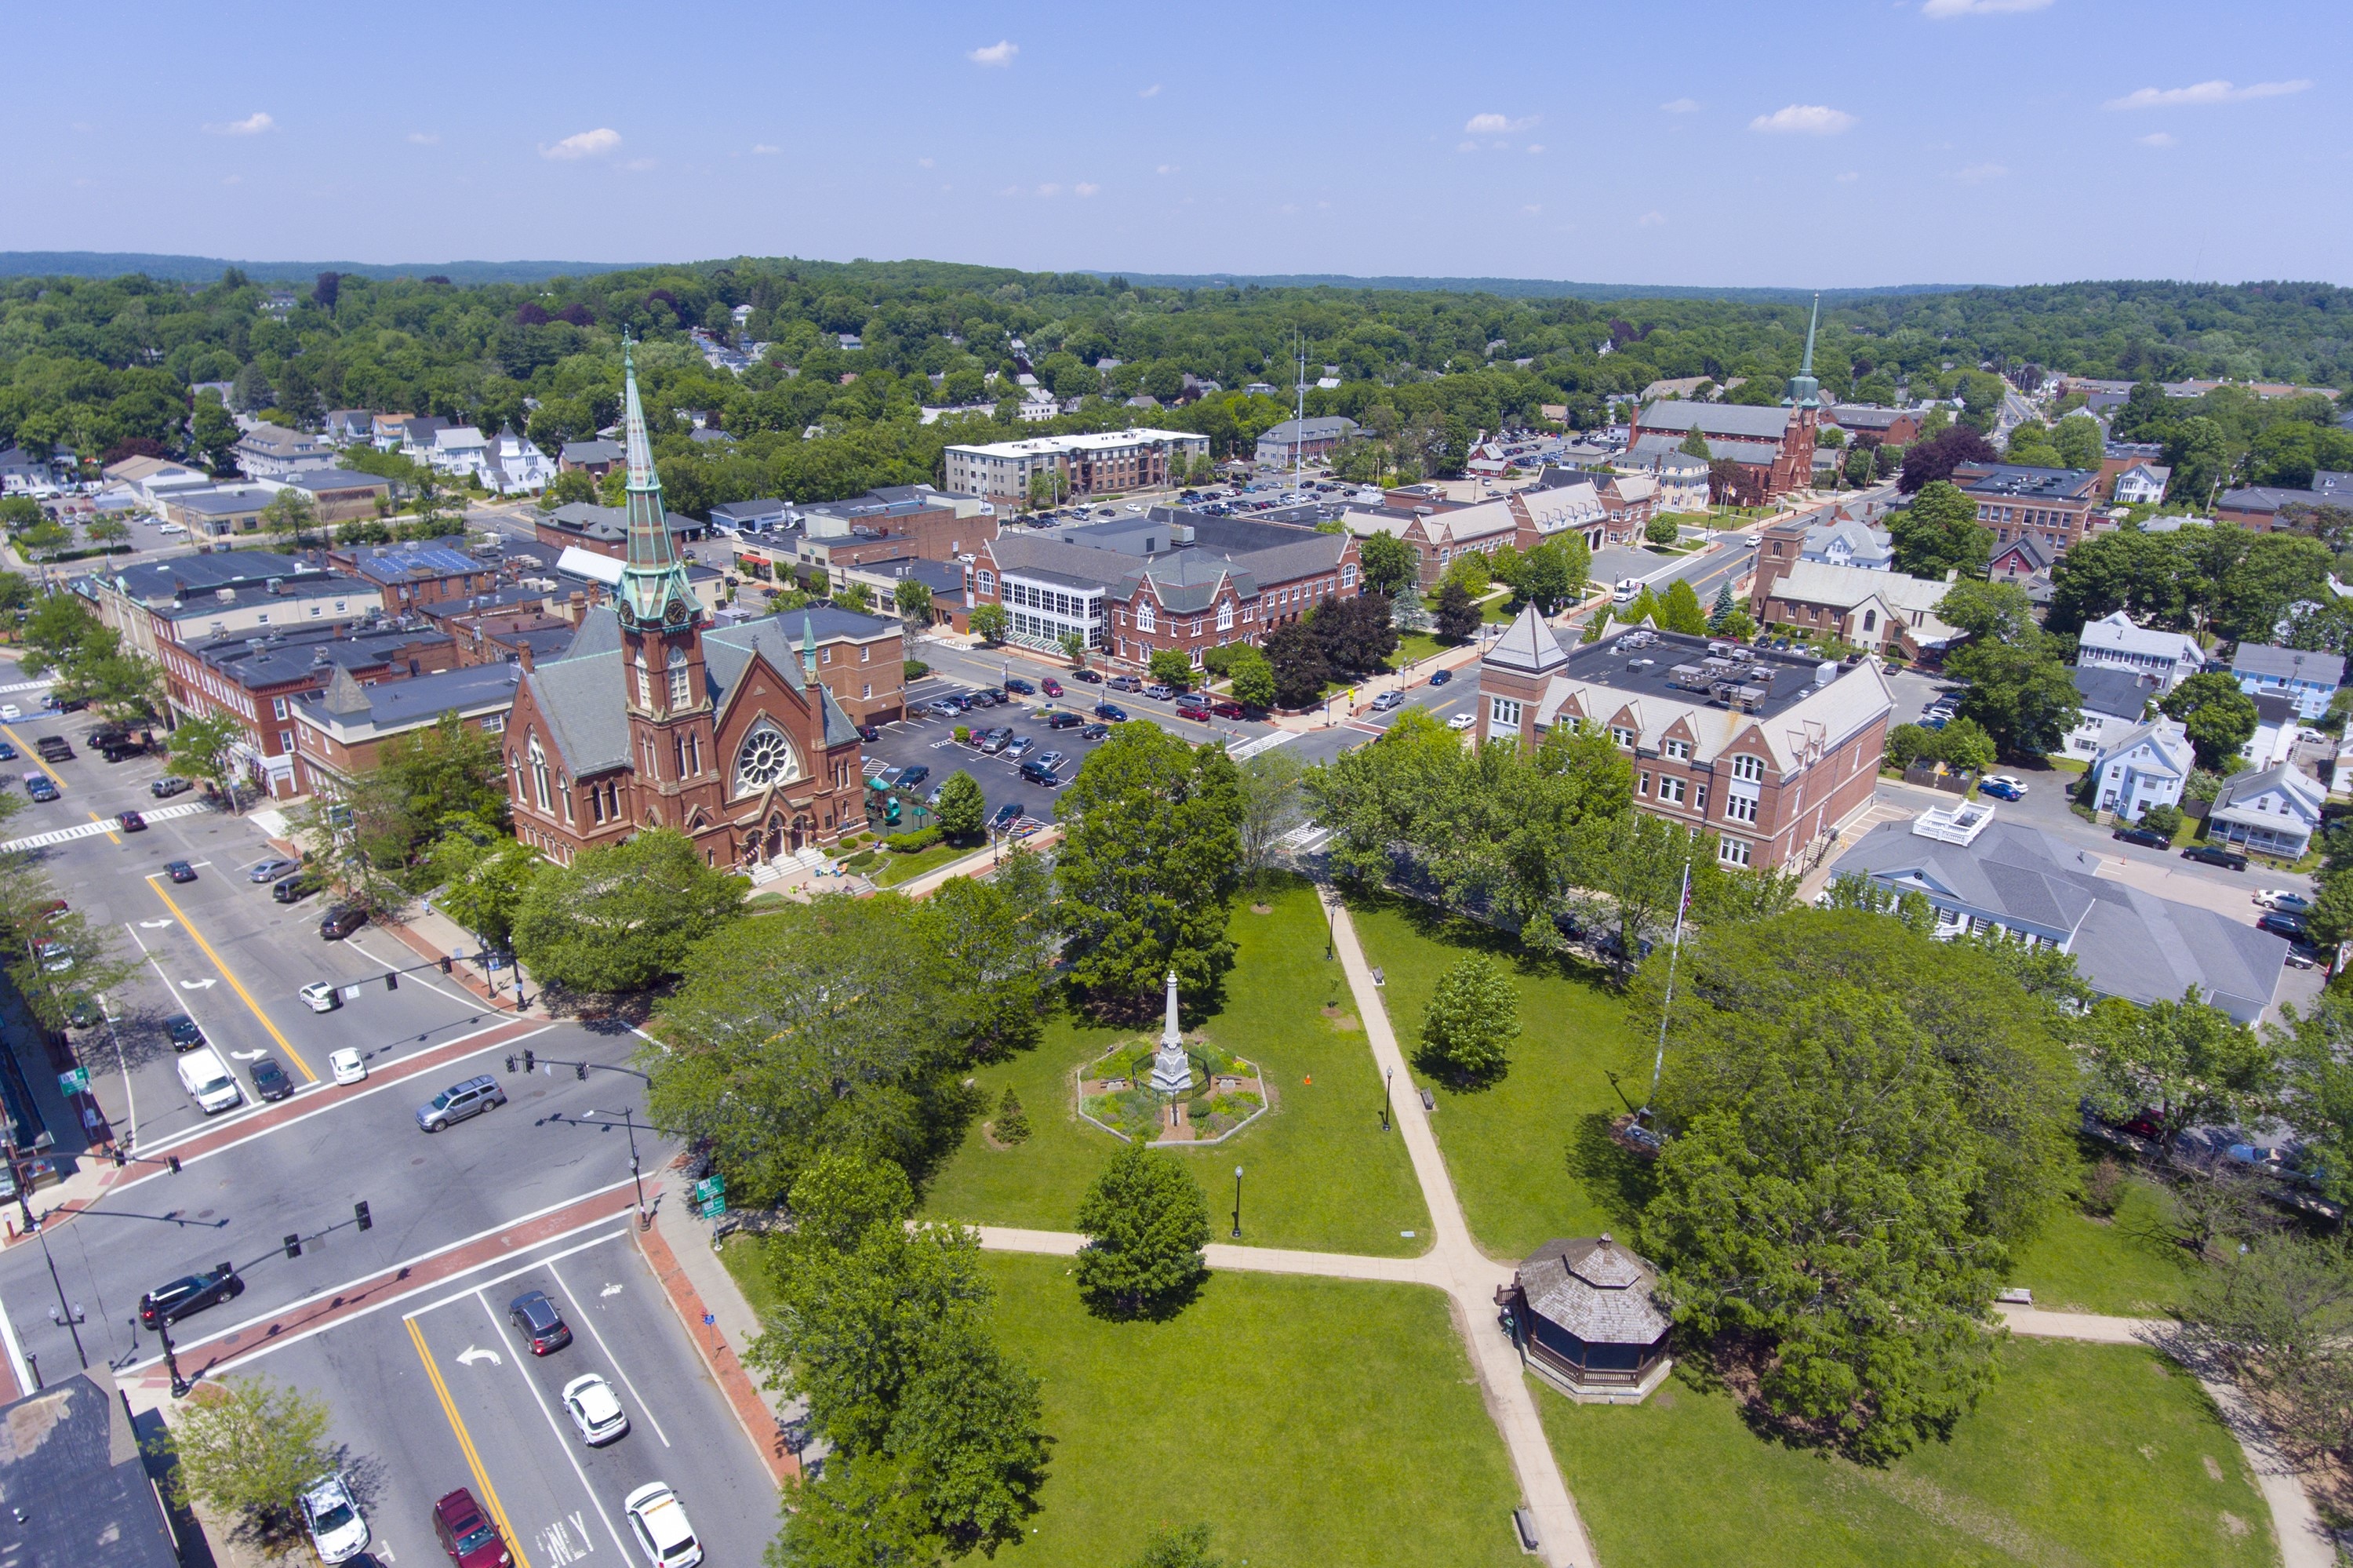 Aerial view of Natick by Shutterstock